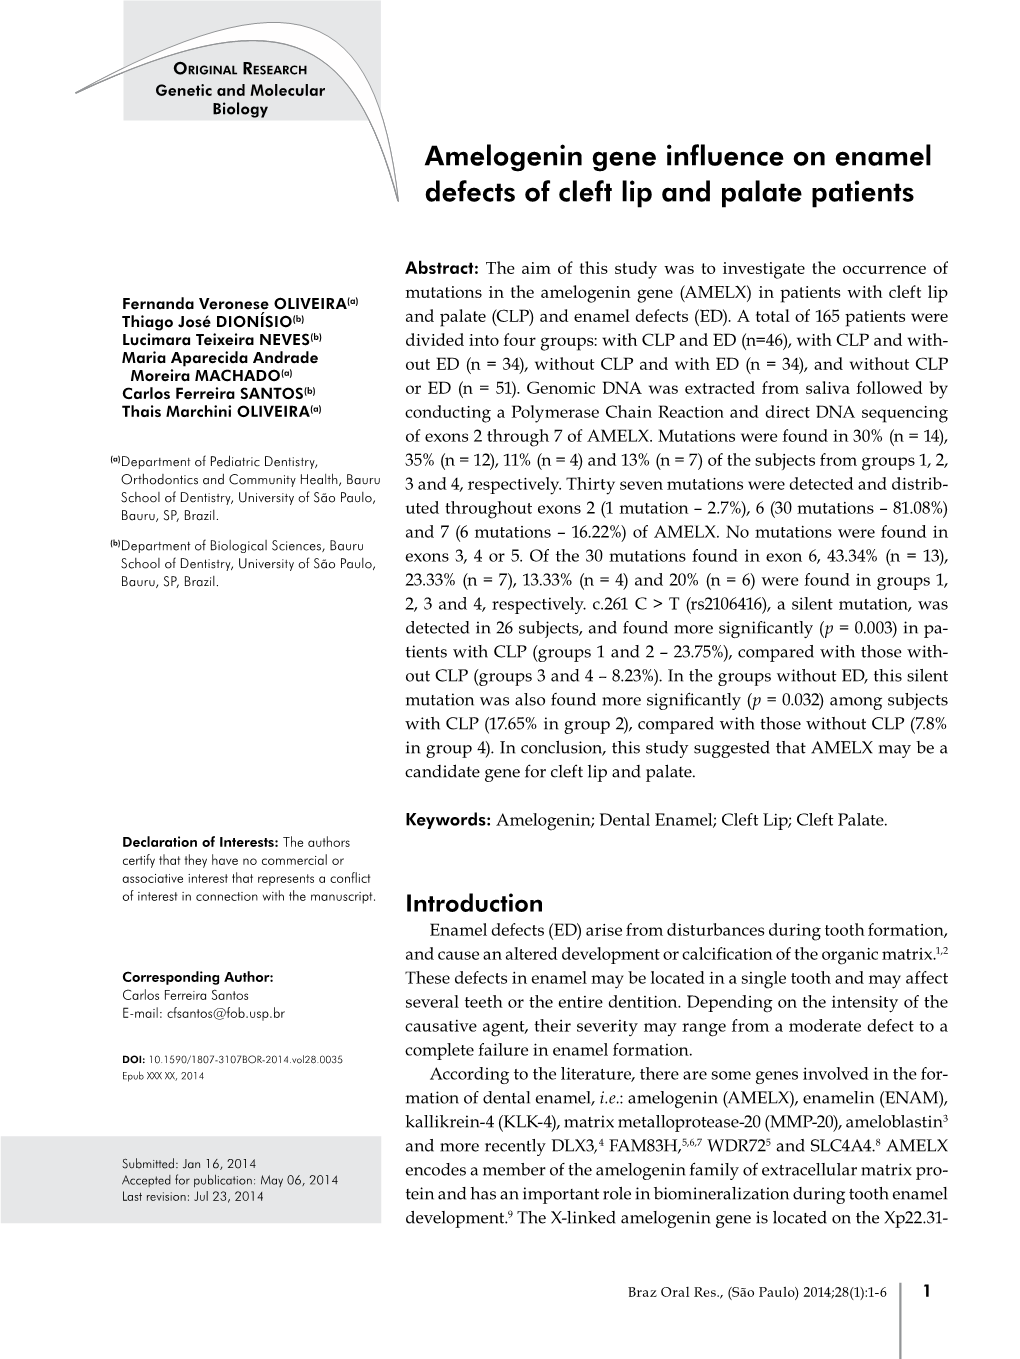 Amelogenin Gene Influence on Enamel Defects of Cleft Lip and Palate Patients